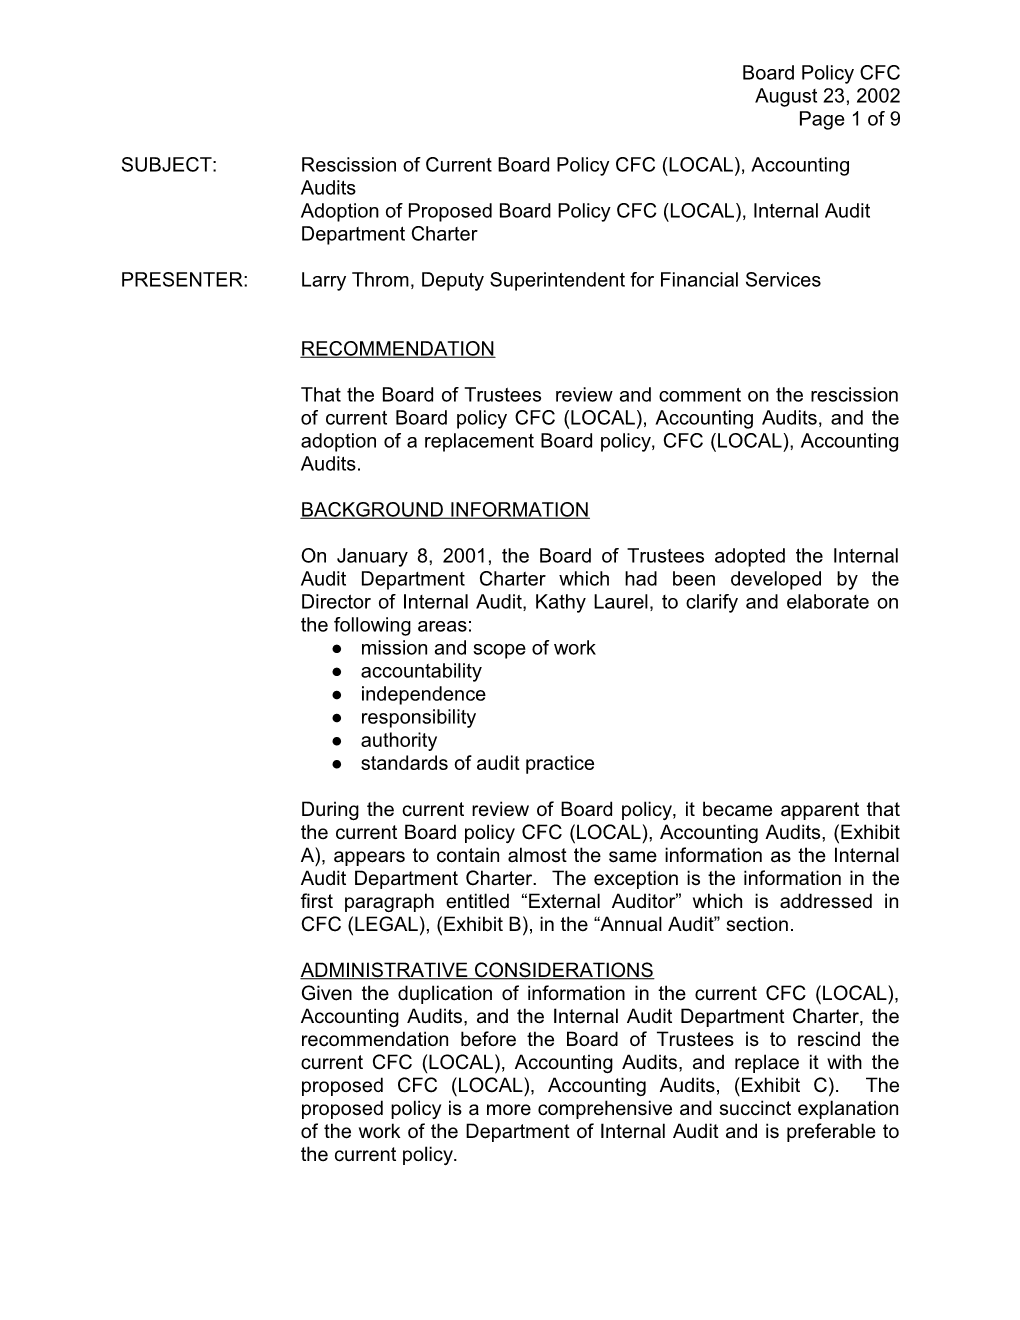 SUBJECT:Rescission of Current Board Policy CFC (LOCAL), Accounting Audits